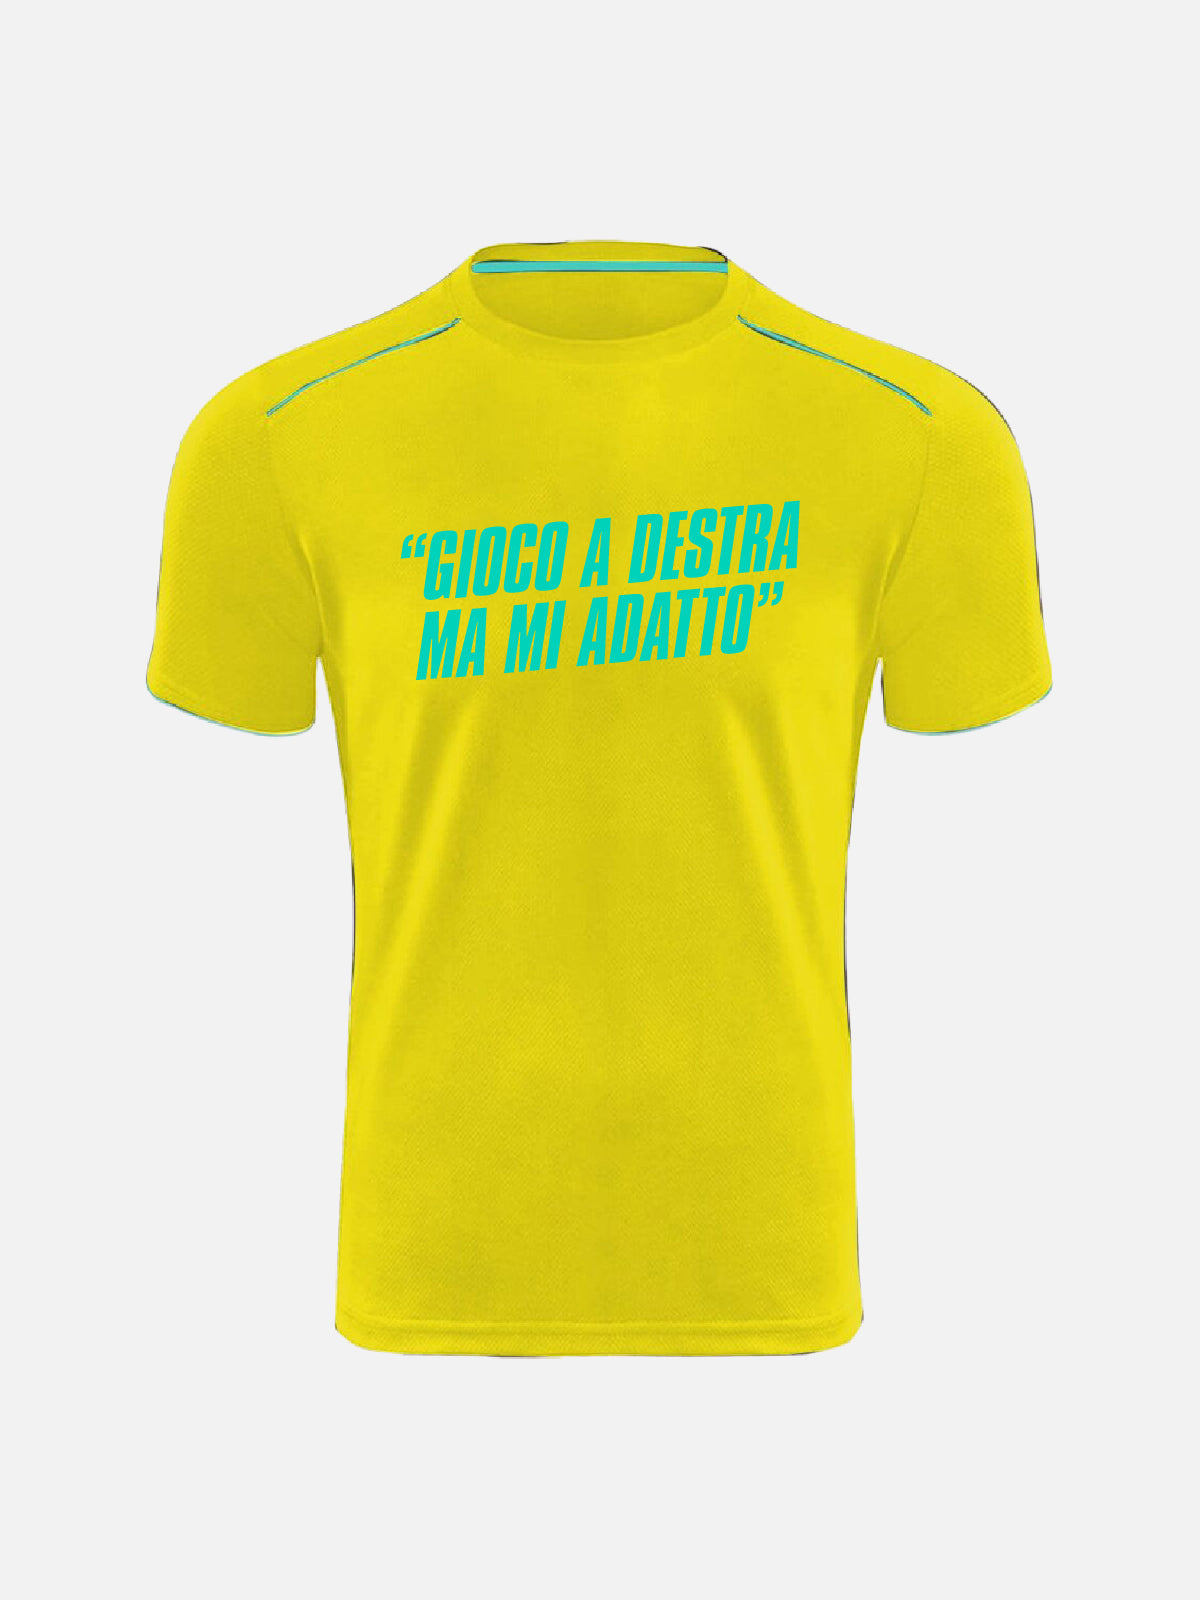 Personalized T-shirt -"I Play Right But I Adapt"